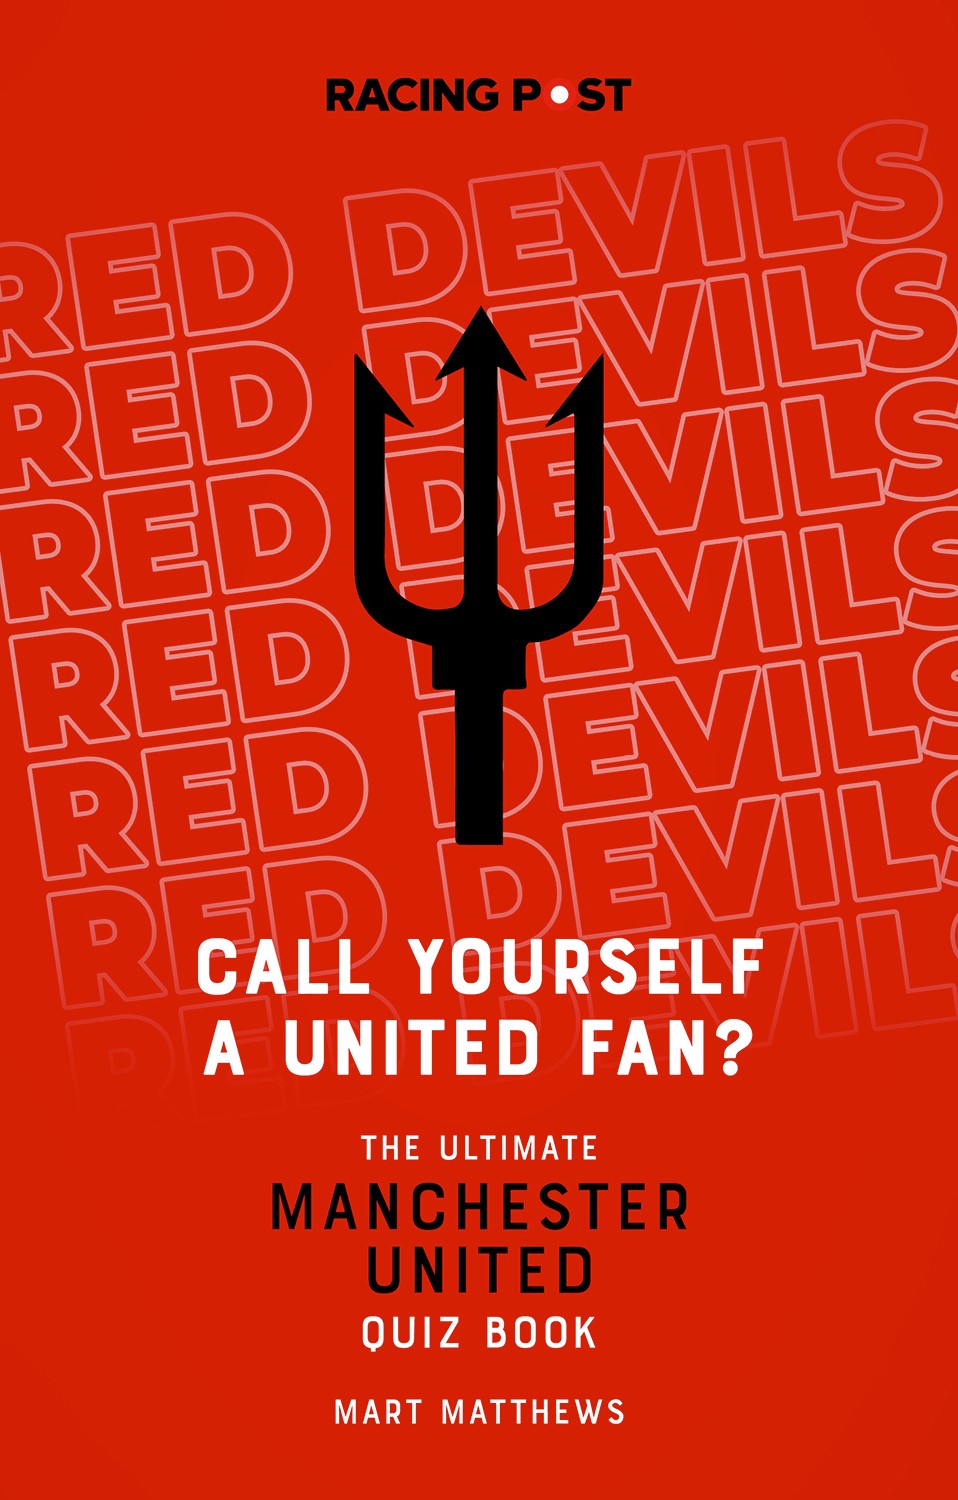 Call Yourself a United Fan?